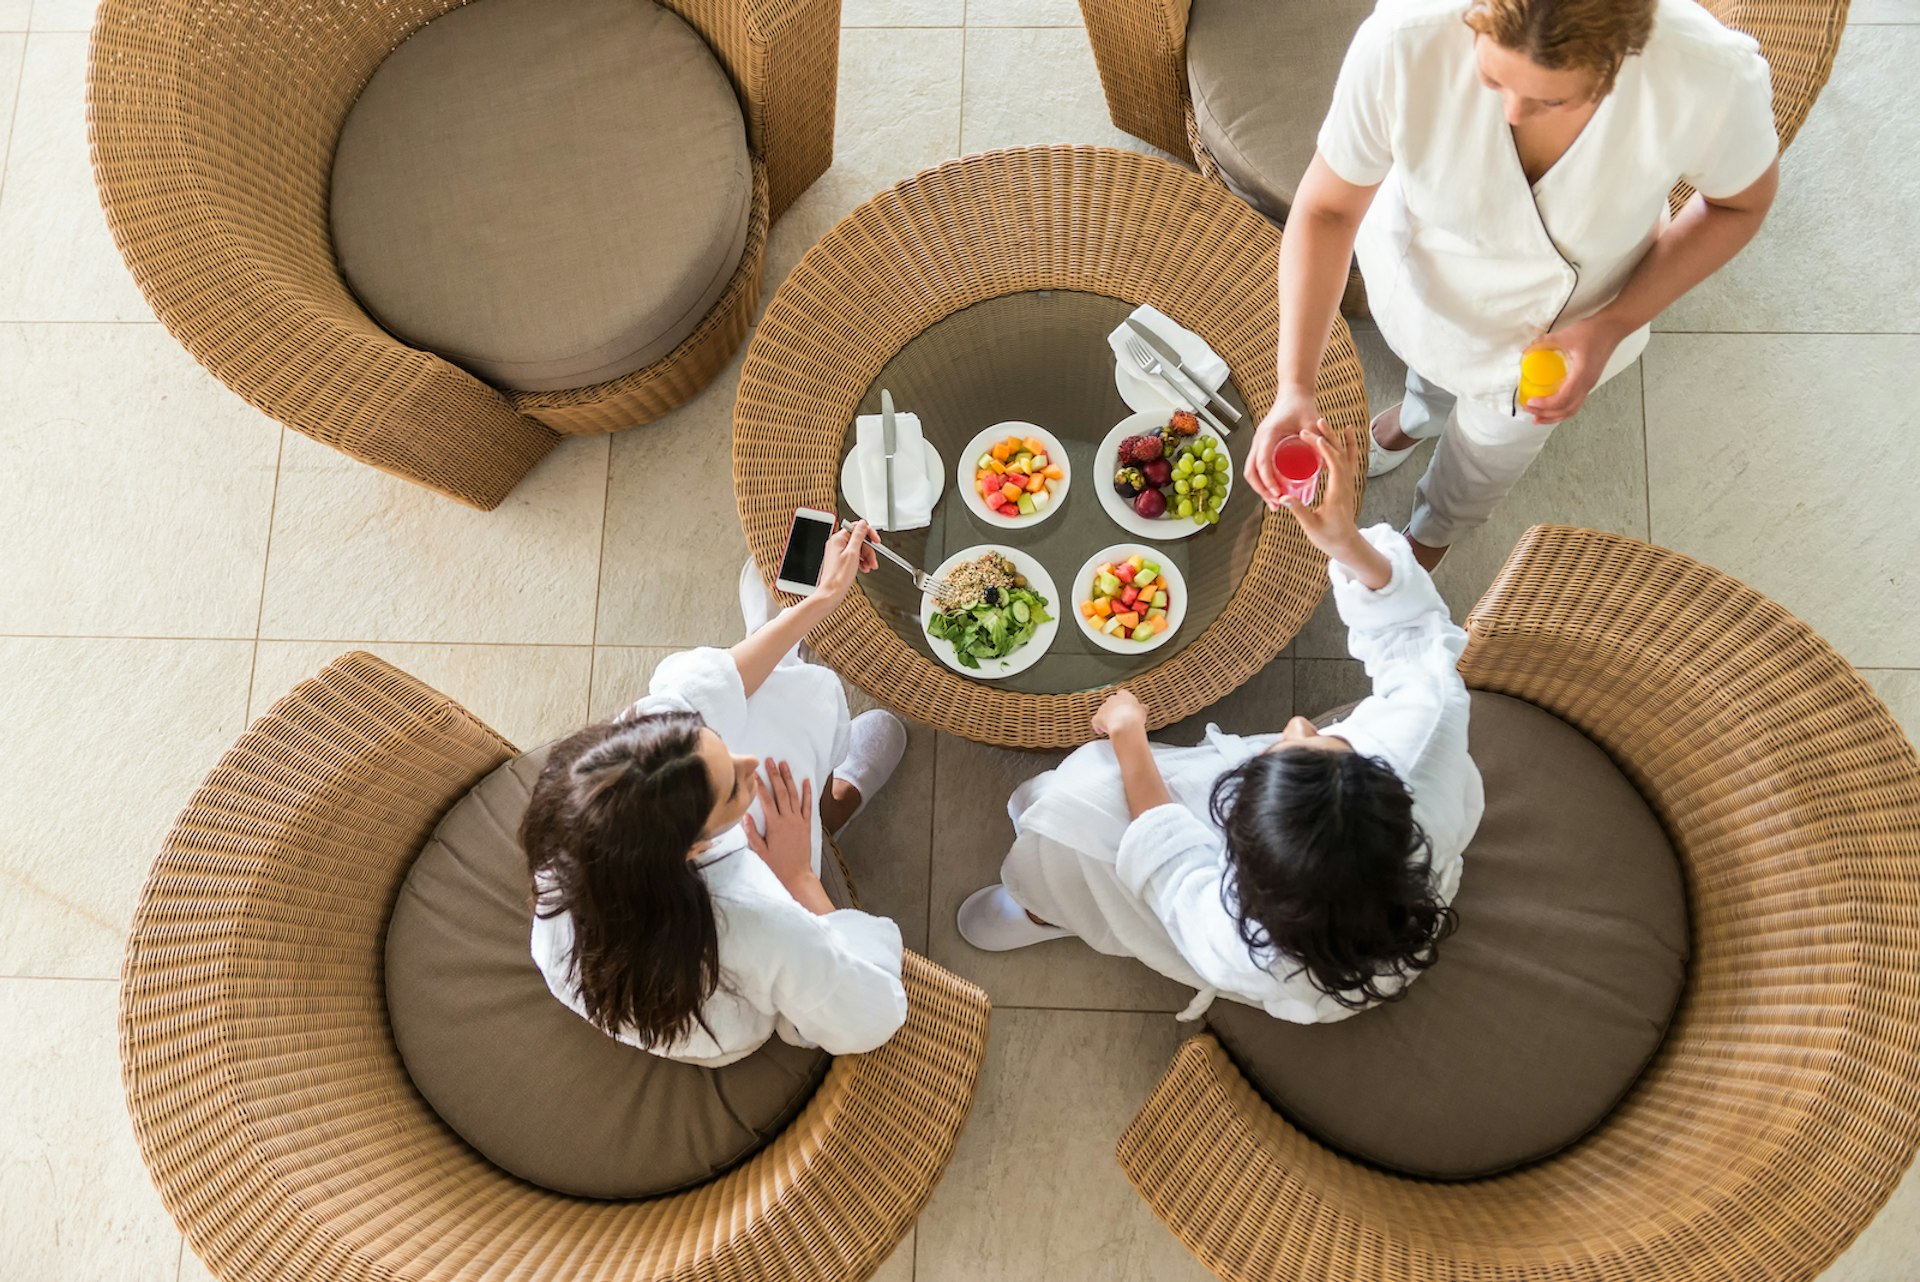 Two girlfriends in white bathrobes and slippers eating a healthy spa lunch at a resort hotel while a therapist serves them fresh orange and watermelon juice. Aerial, overhead view.